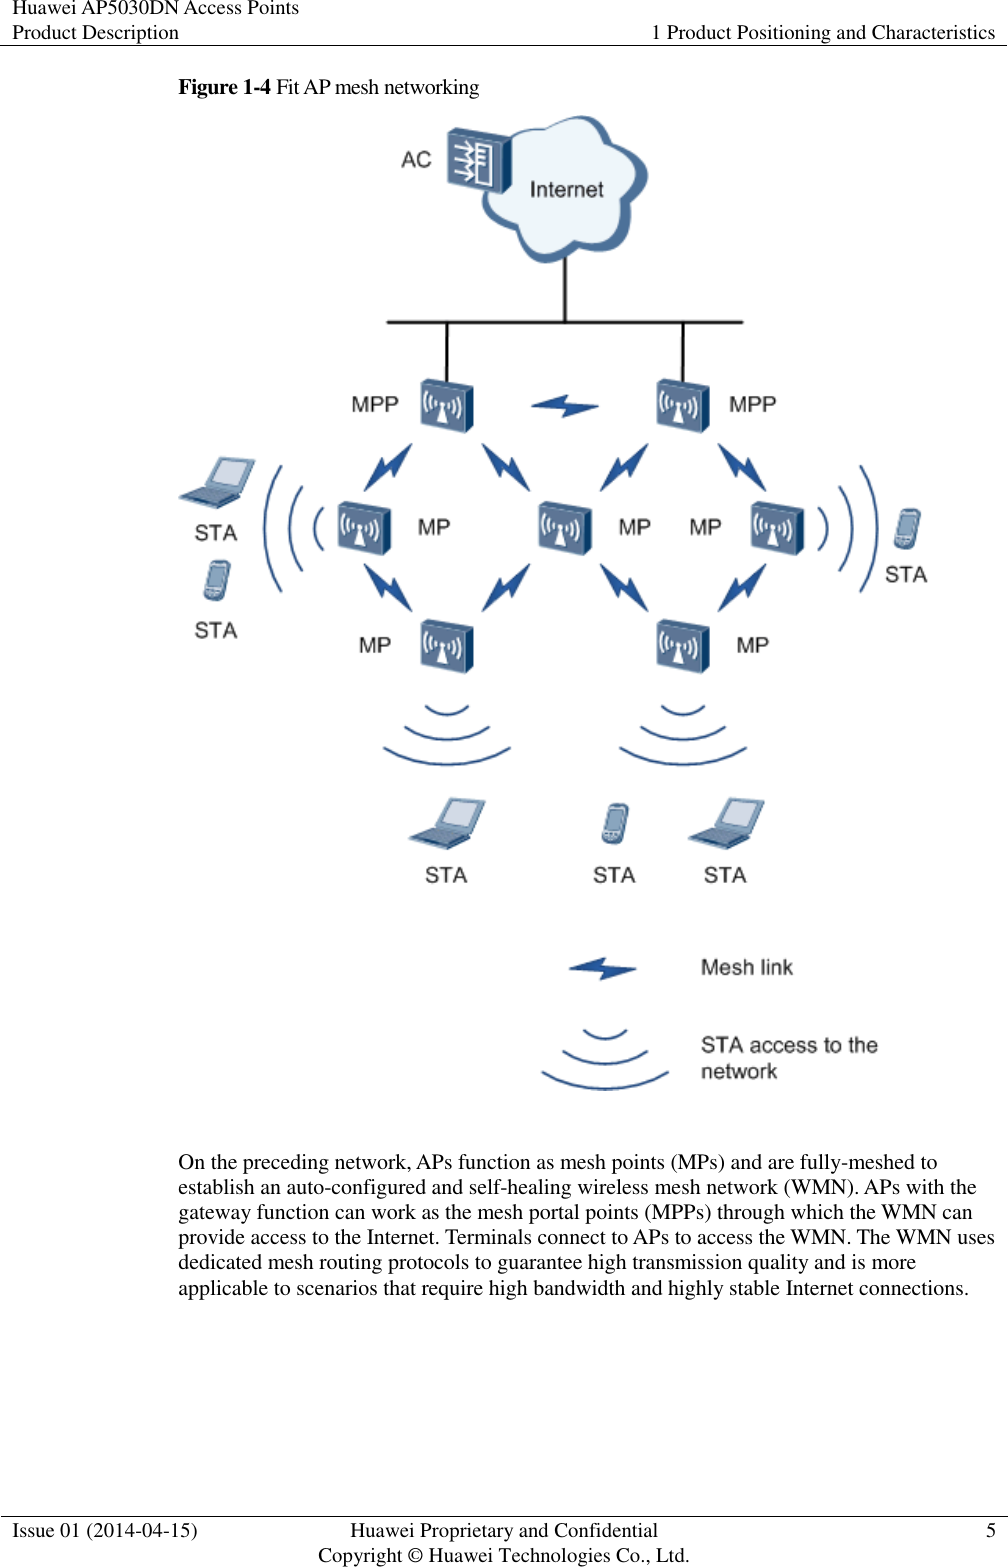 Huawei AP5030DN Access Points Product Description 1 Product Positioning and Characteristics  Issue 01 (2014-04-15) Huawei Proprietary and Confidential                                     Copyright © Huawei Technologies Co., Ltd. 5  Figure 1-4 Fit AP mesh networking   On the preceding network, APs function as mesh points (MPs) and are fully-meshed to establish an auto-configured and self-healing wireless mesh network (WMN). APs with the gateway function can work as the mesh portal points (MPPs) through which the WMN can provide access to the Internet. Terminals connect to APs to access the WMN. The WMN uses dedicated mesh routing protocols to guarantee high transmission quality and is more applicable to scenarios that require high bandwidth and highly stable Internet connections. 